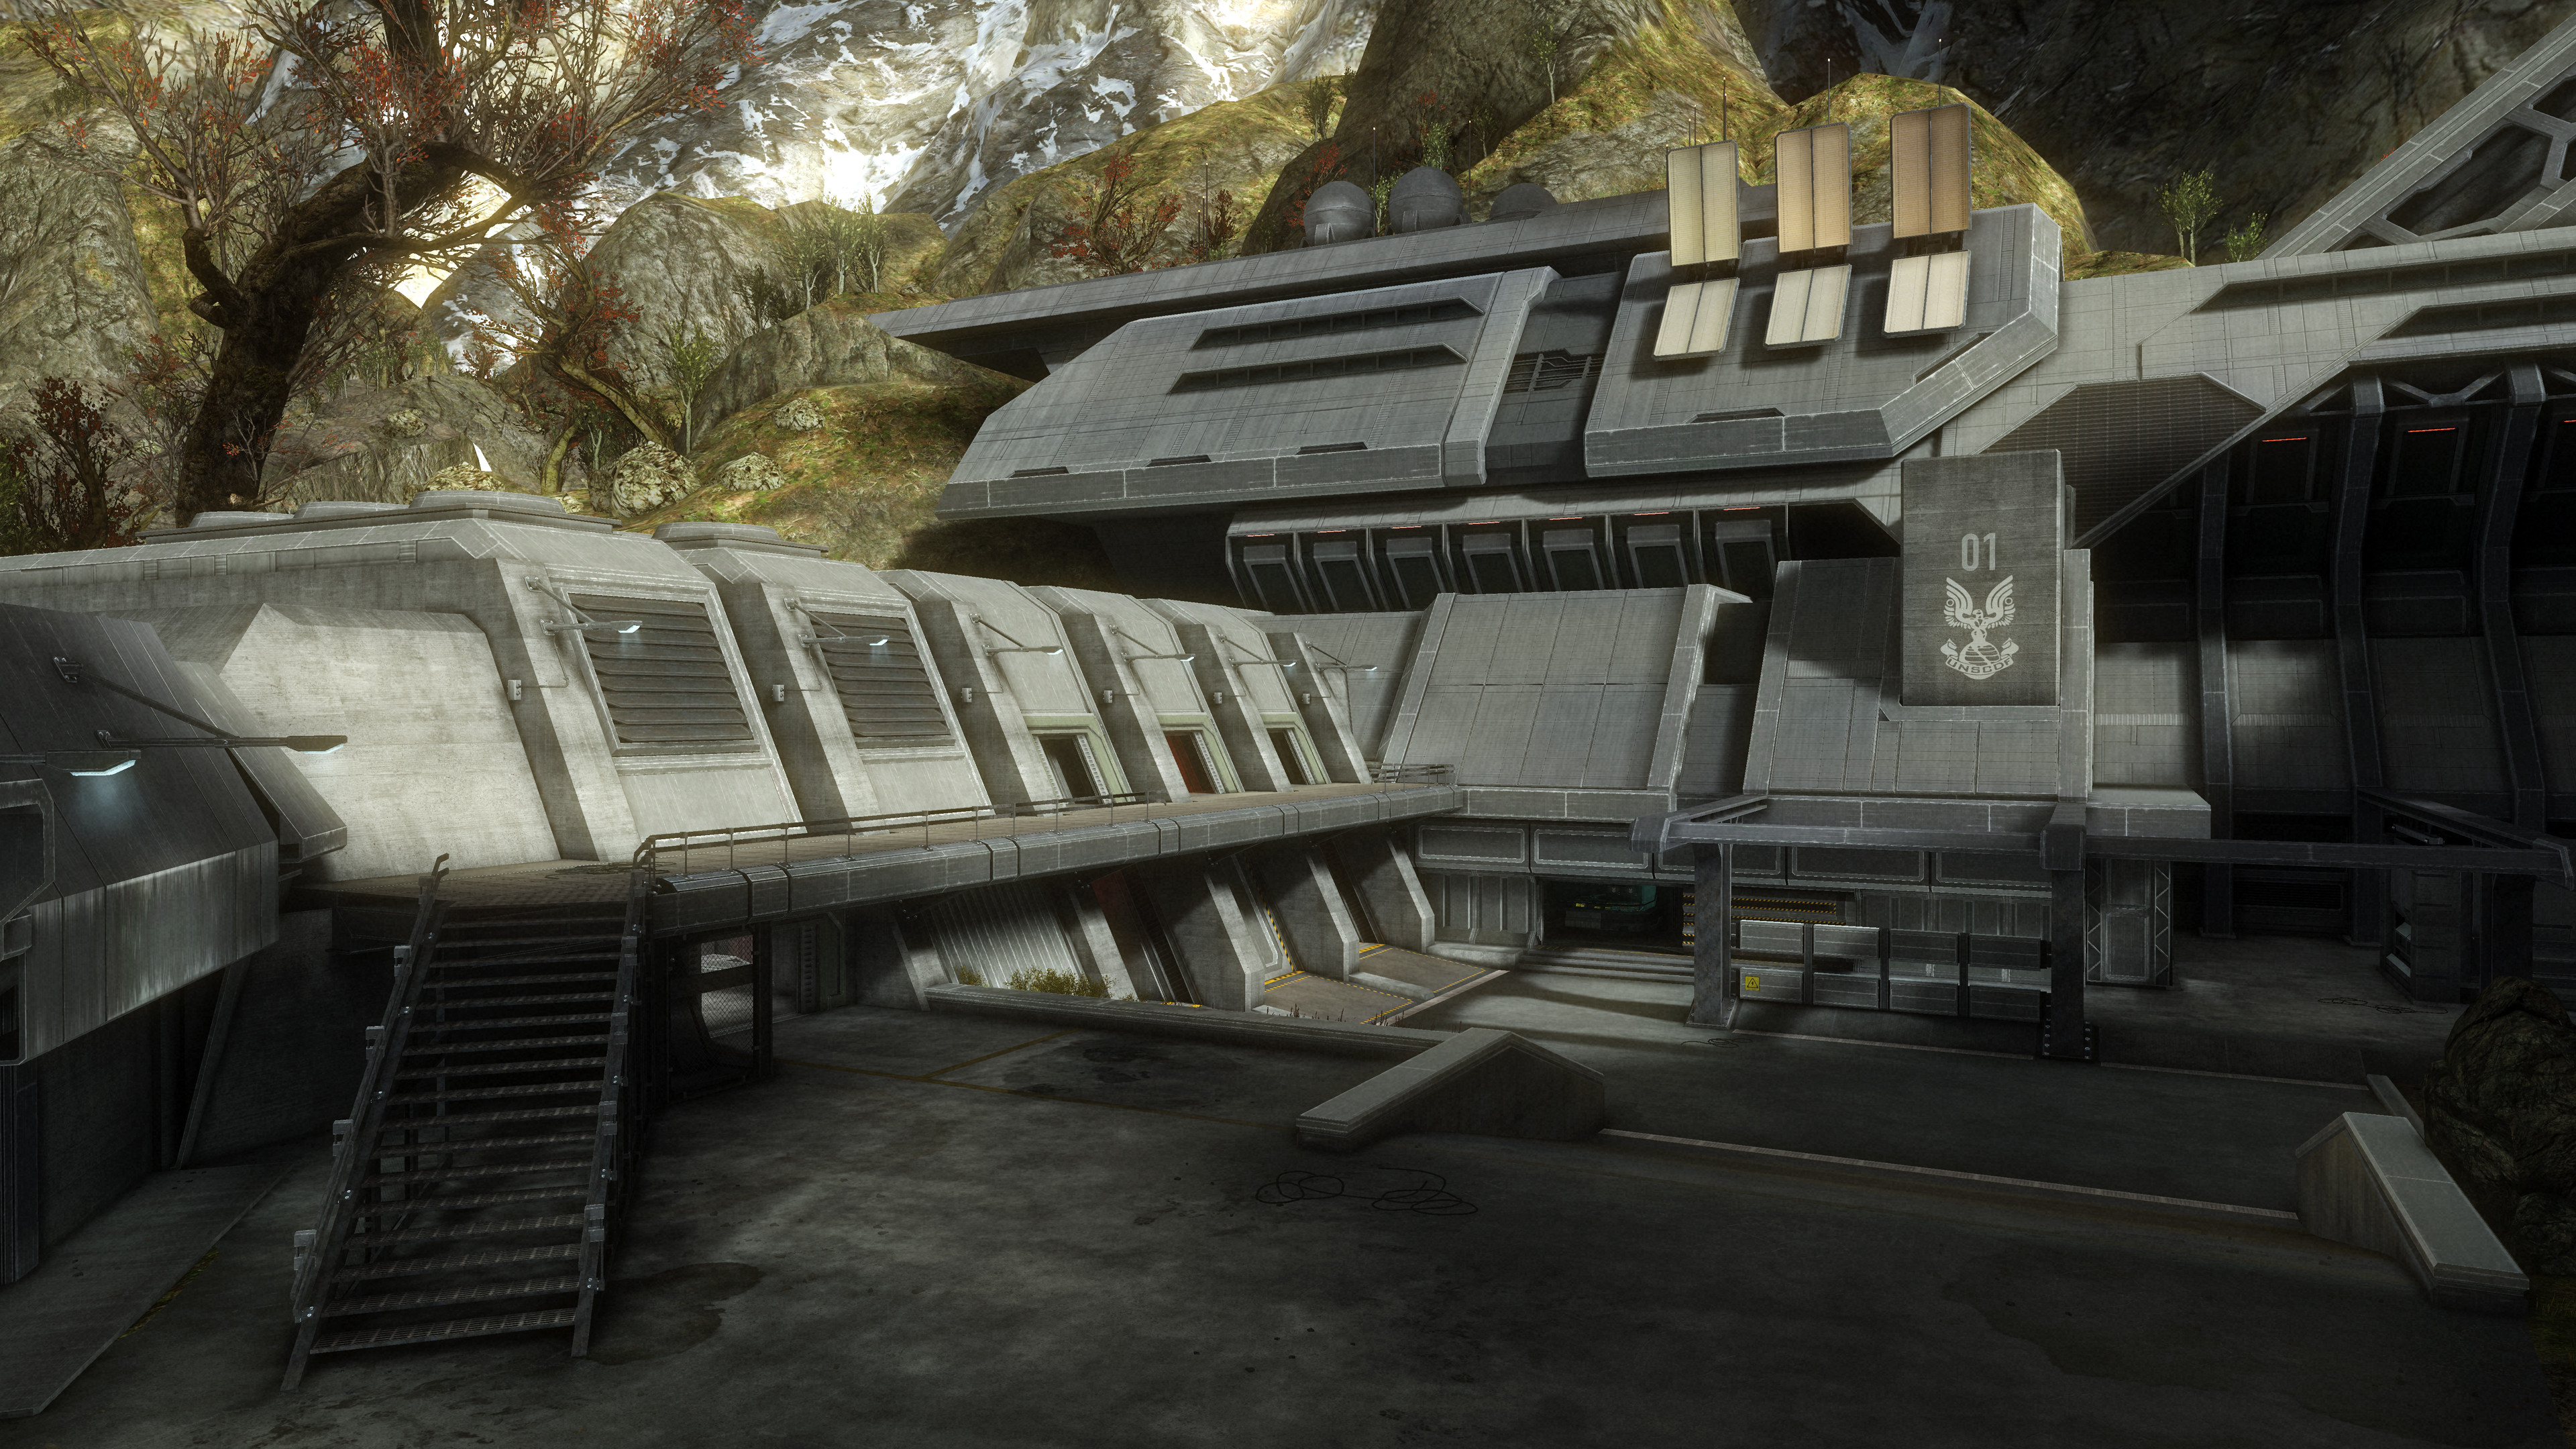 Halo Reach - UNSC Outpost
Hard surface geometry, materials, and lighting. - 2010
Terrain and skybox by Bungie